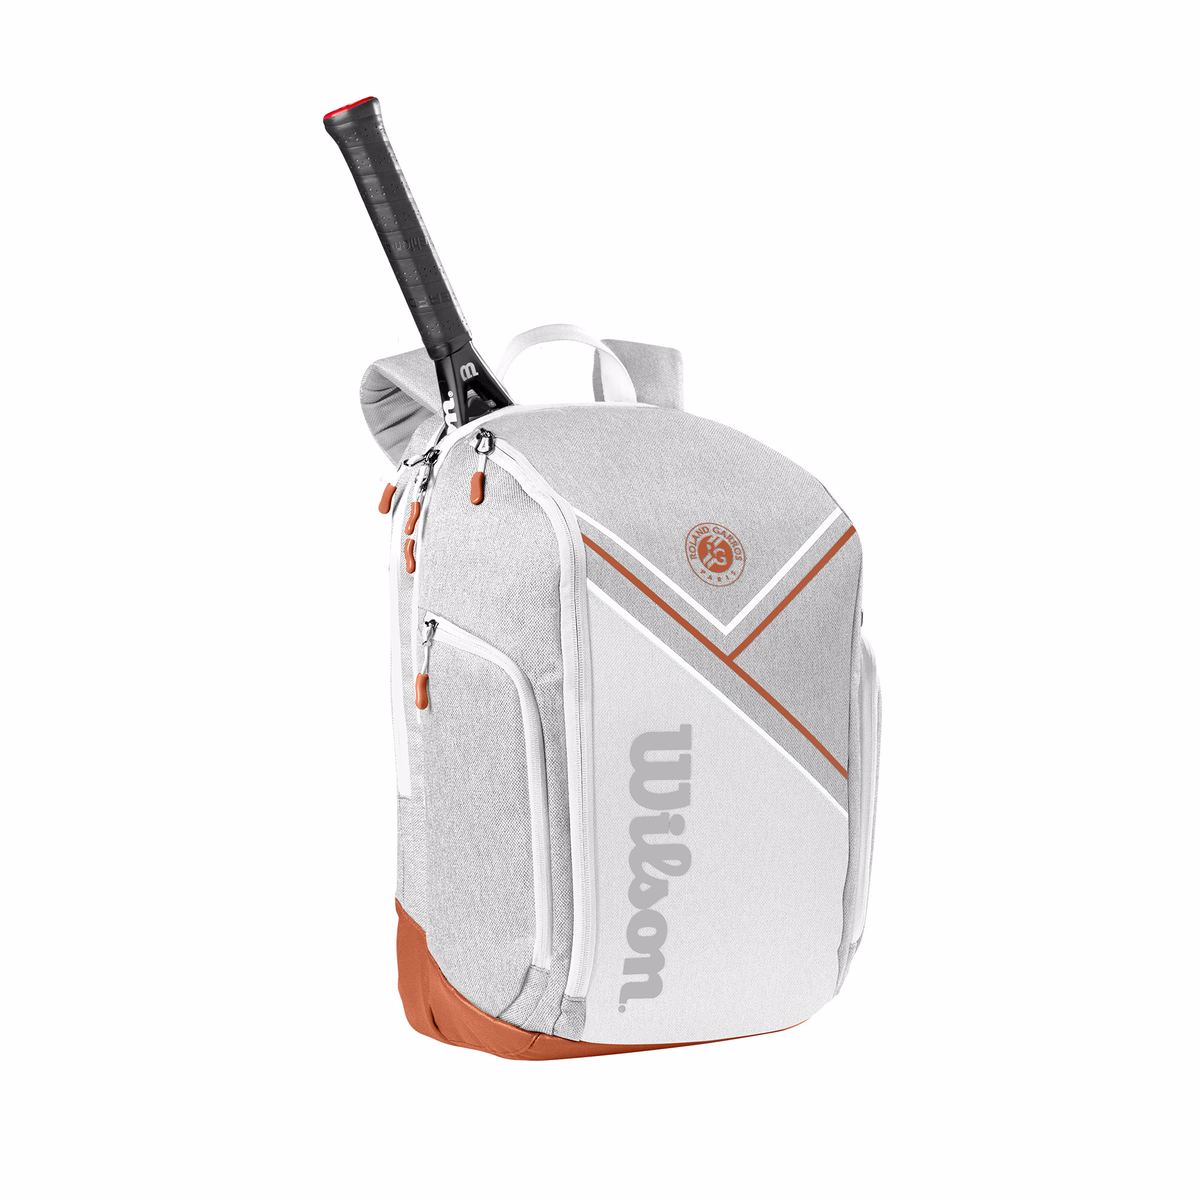 WR8018302_1_Roland_Garros_Super_Tour_Backpack_Clay_WH.png.high-res_1200x1200